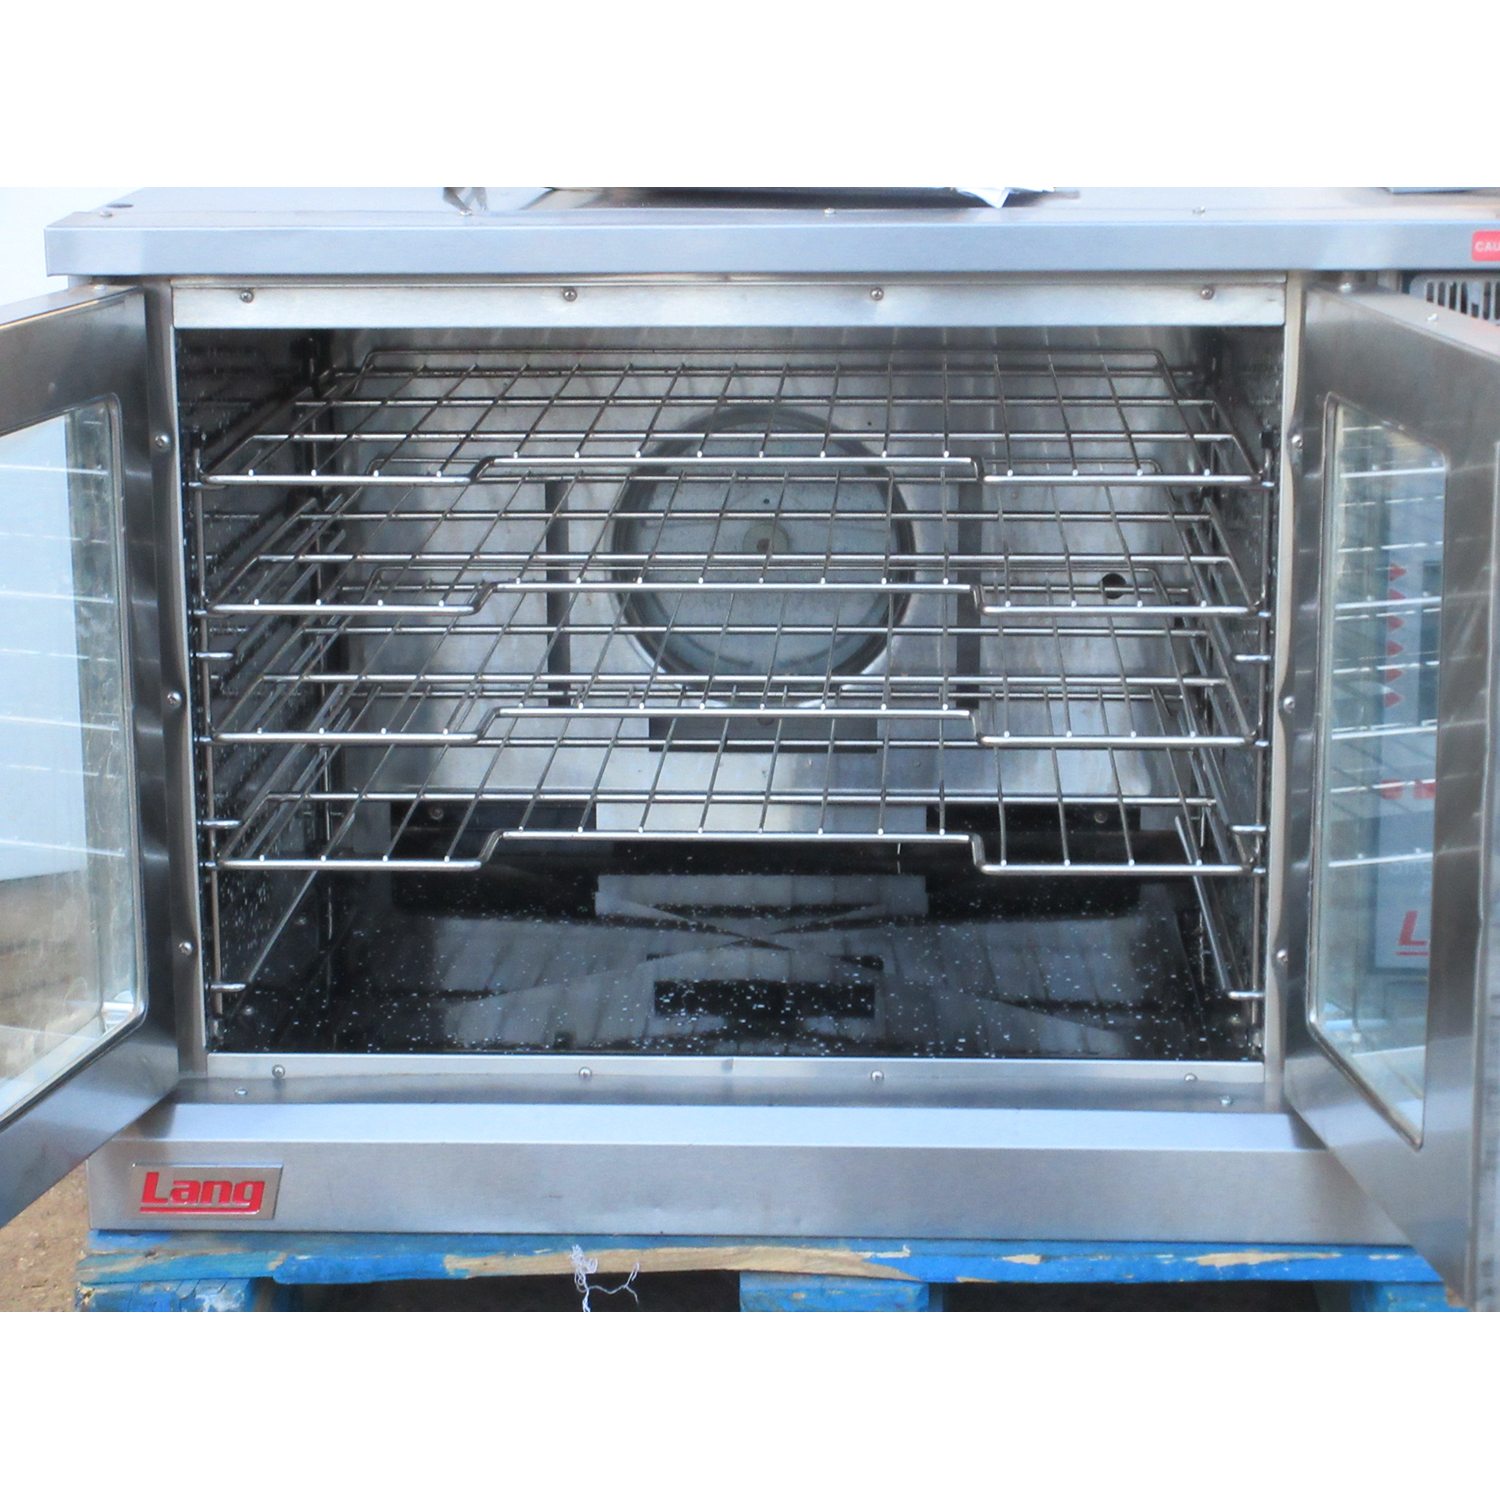 Lang ECCO-PT Electric Convection Oven, Used Excellent Condition image 2